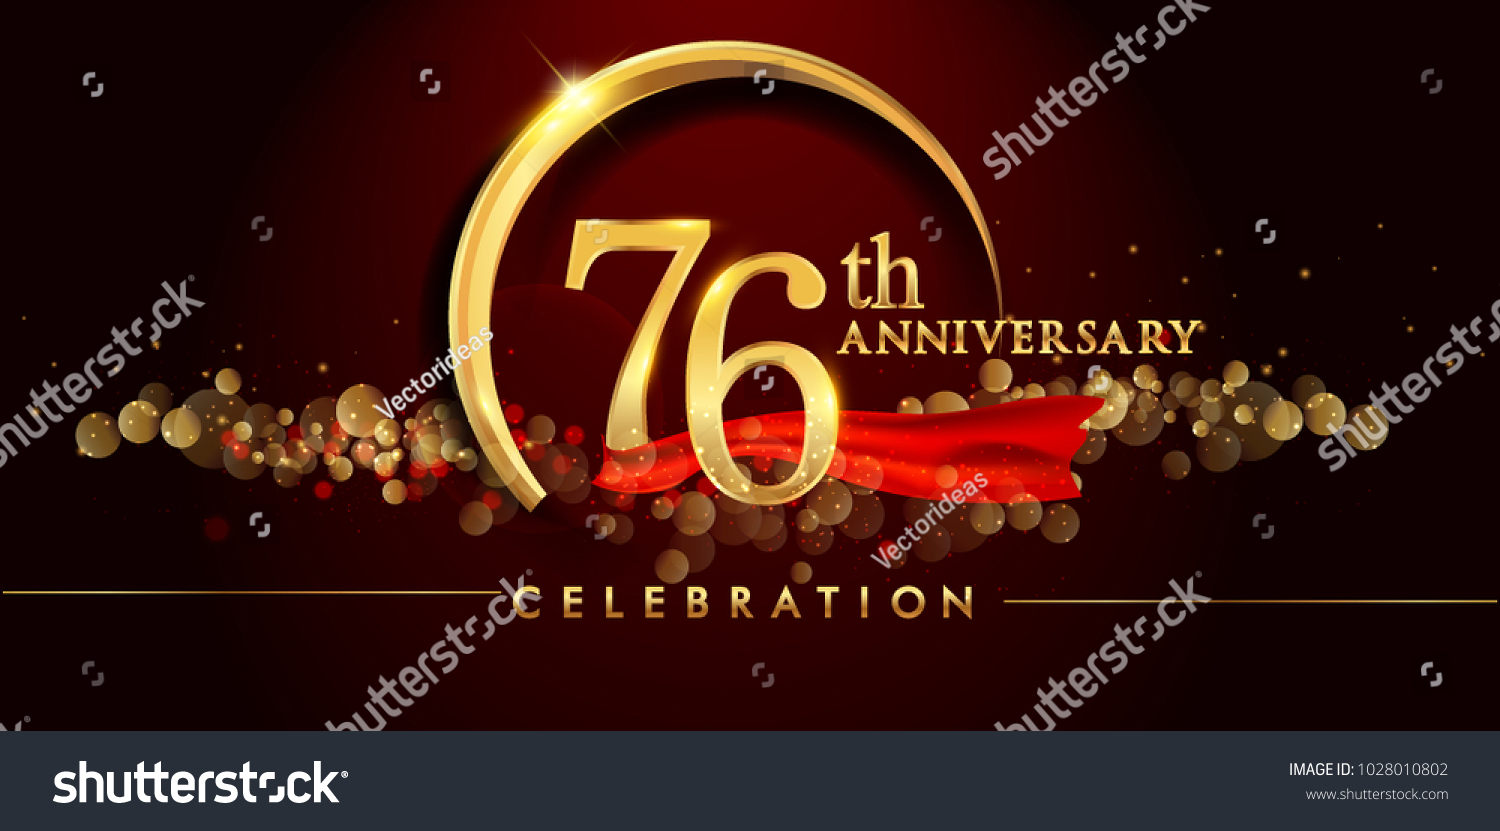 76th Anniversary Logo With Golden Ring Confetti Royalty Free Stock Vector 1028010802 3399